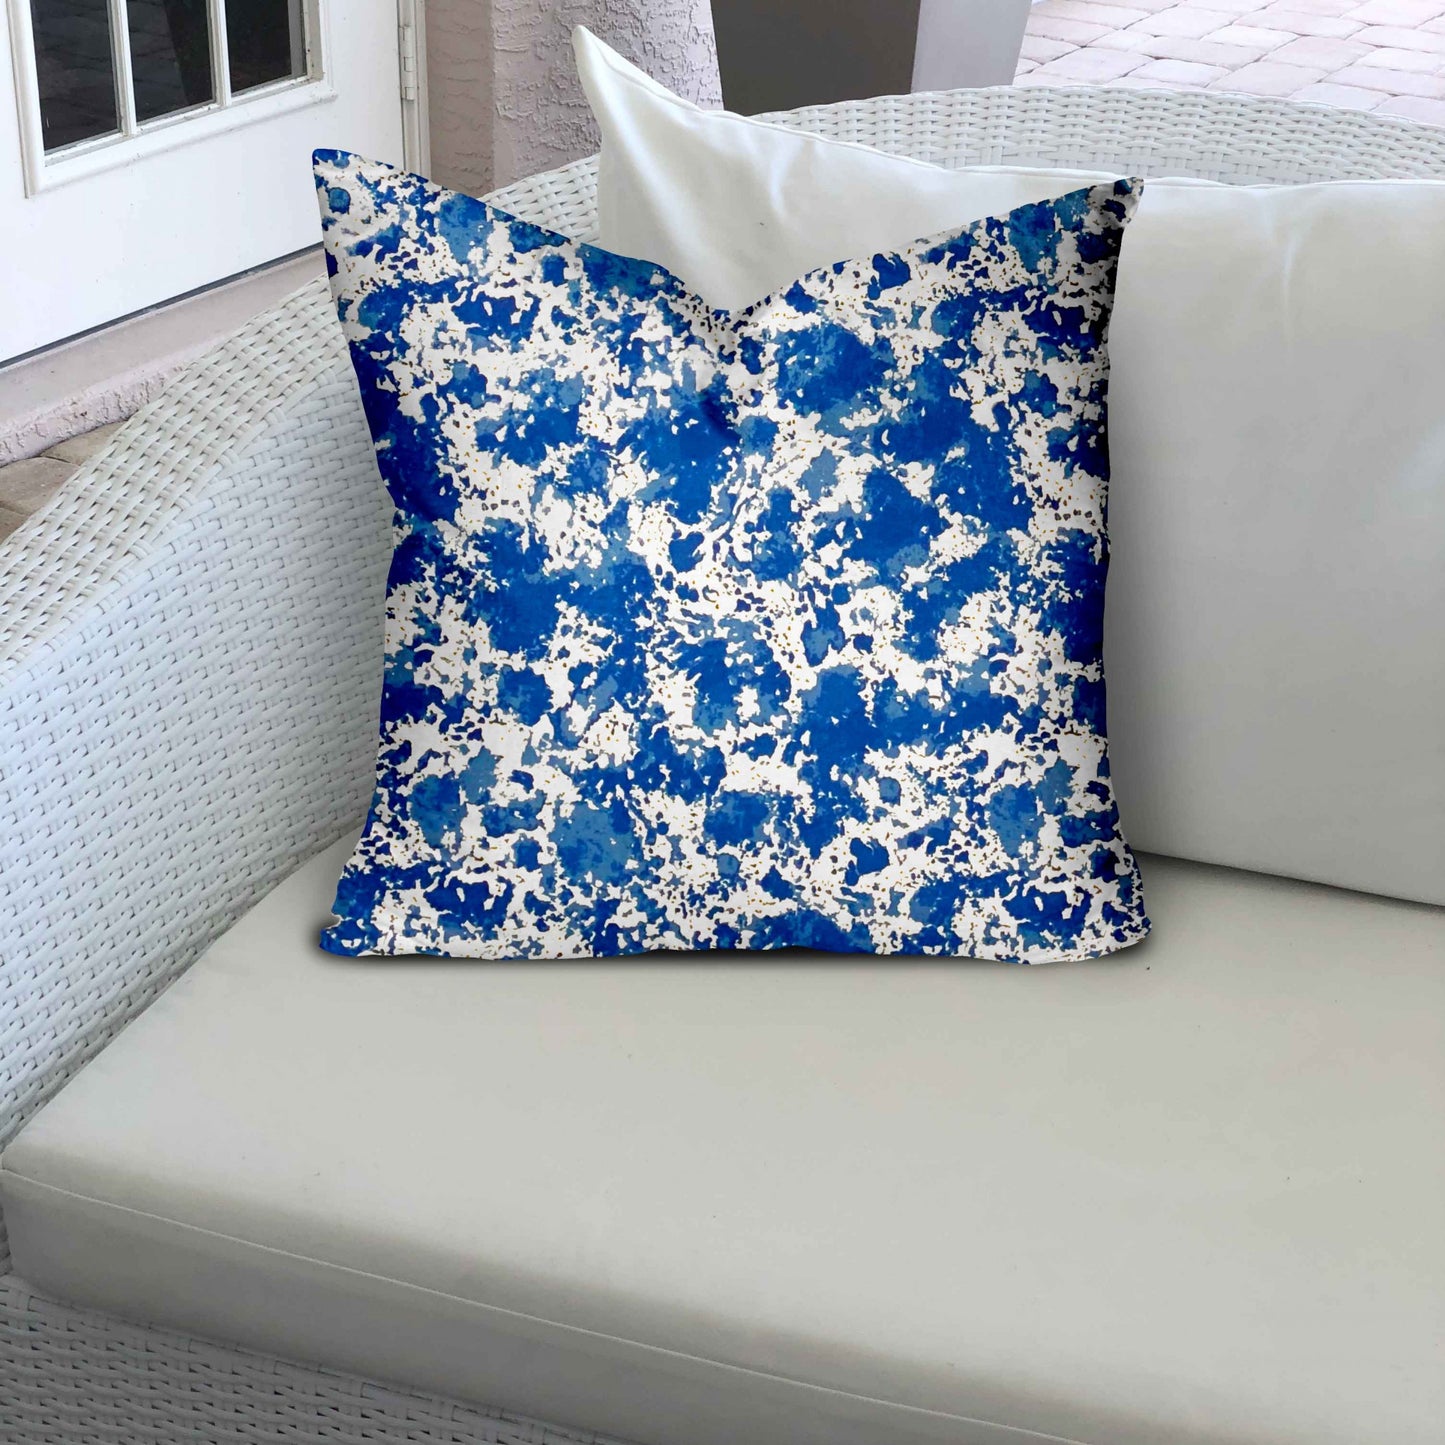 16" X 16" Blue And White Zippered Coastal Throw Indoor Outdoor Pillow